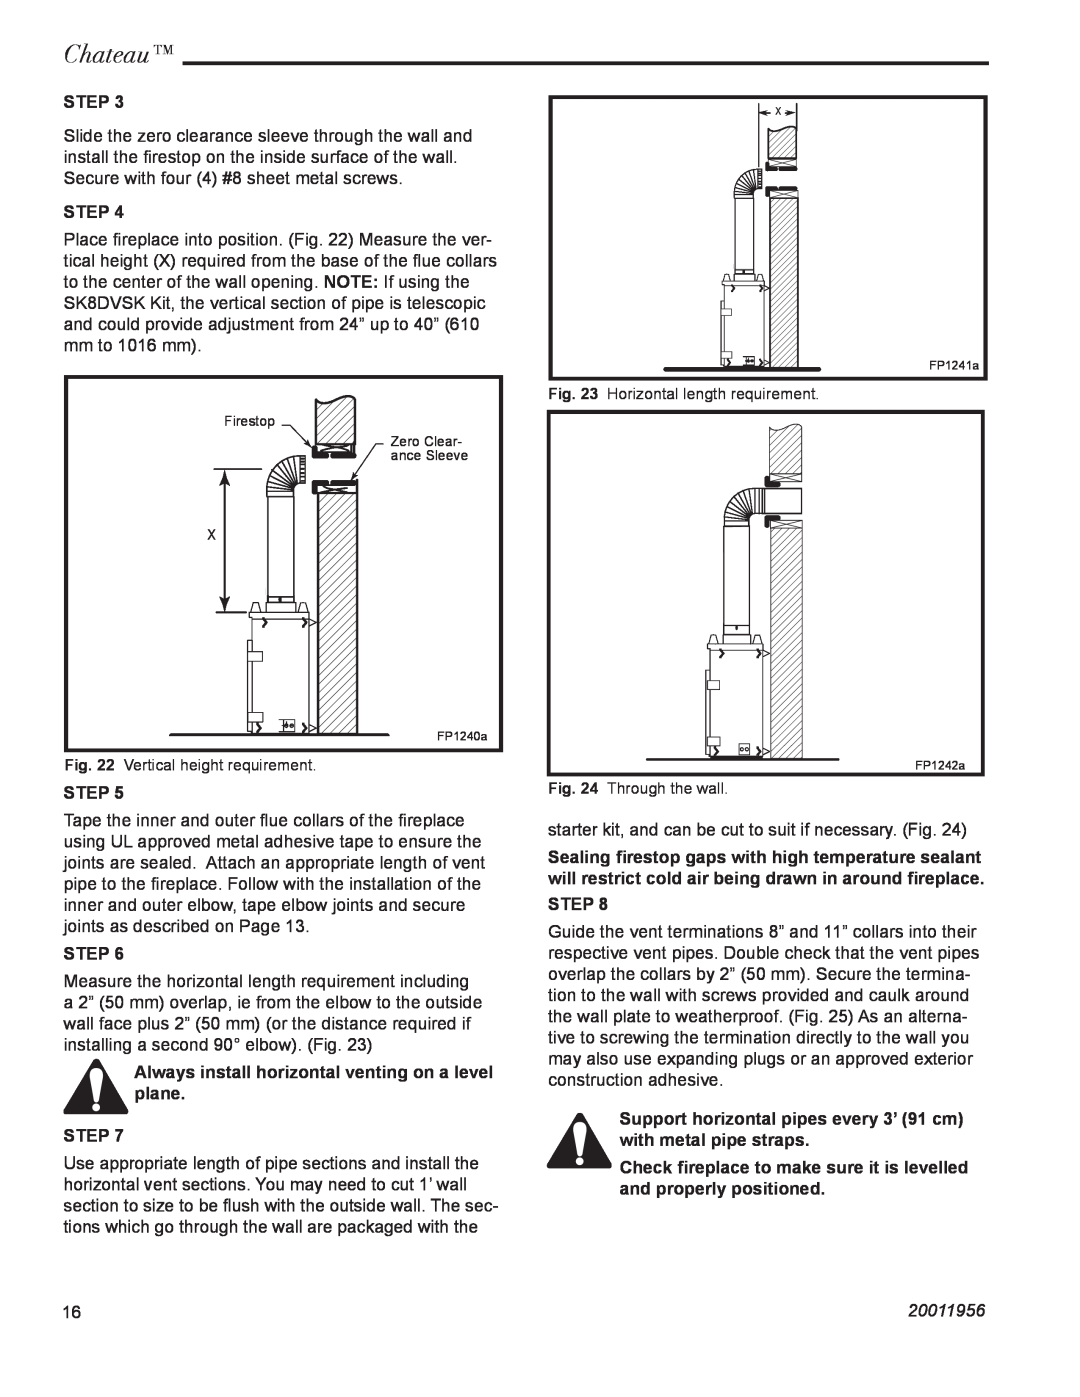 Vermont Casting DVT44 installation instructions Chateau, Step, 20011956 